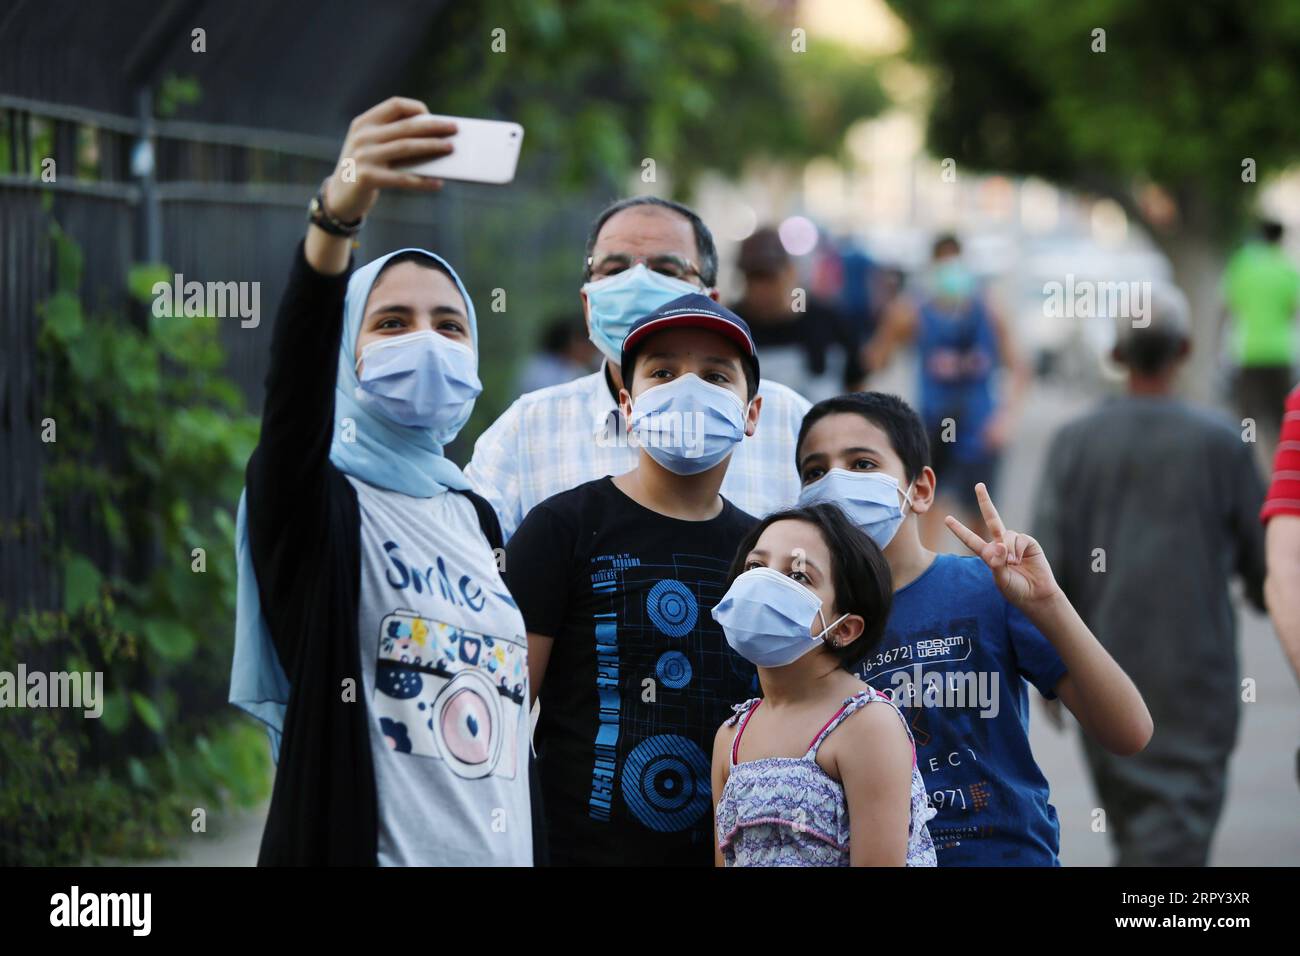 200612 -- CAIRO, June 12, 2020 Xinhua -- People wearing face masks take selfies on a street in Cairo, Egypt, on June 12, 2020. Egypt witnessed on Friday a record of 1,577 single-day new COVID-19 cases, raising the total infections confirmed in the country since mid-February to 41,303, said spokesman with the Health Ministry. Xinhua/Ahmed Gomaa EGYPT-CAIRO-COVID-19-CASES PUBLICATIONxNOTxINxCHN Stock Photo